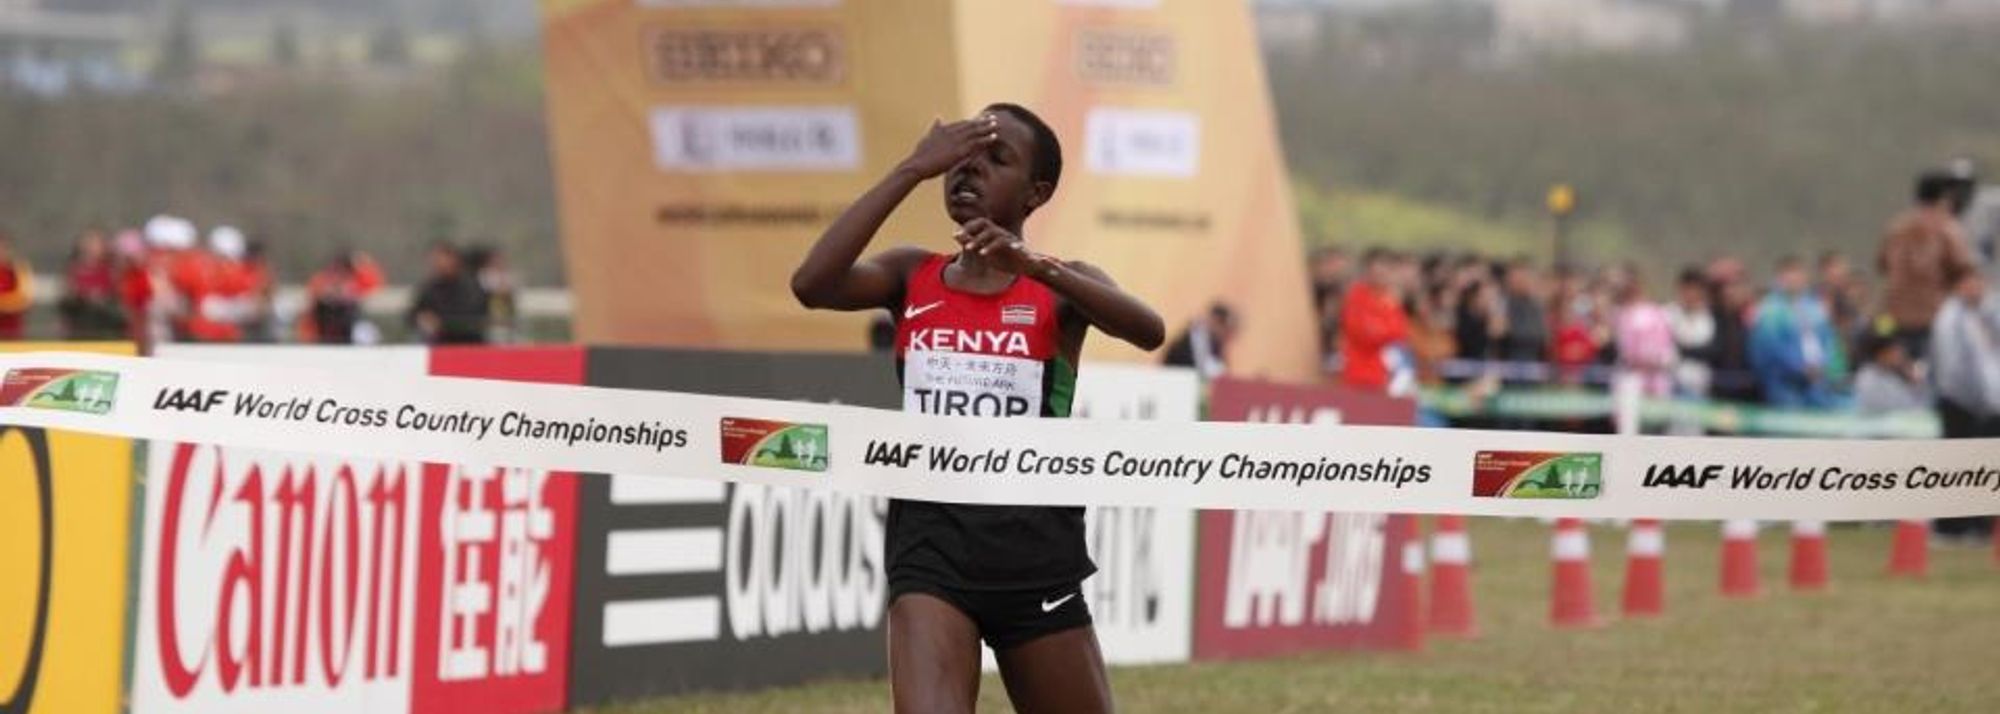 In the battle of East Africa, and with an impressive start-to-finish victory, 19-year-old Agnes Tirop brought home Kenya’s 300th IAAF World Cross Country Championships medal when winning the women’s senior race in Guiyang on Saturday (28).